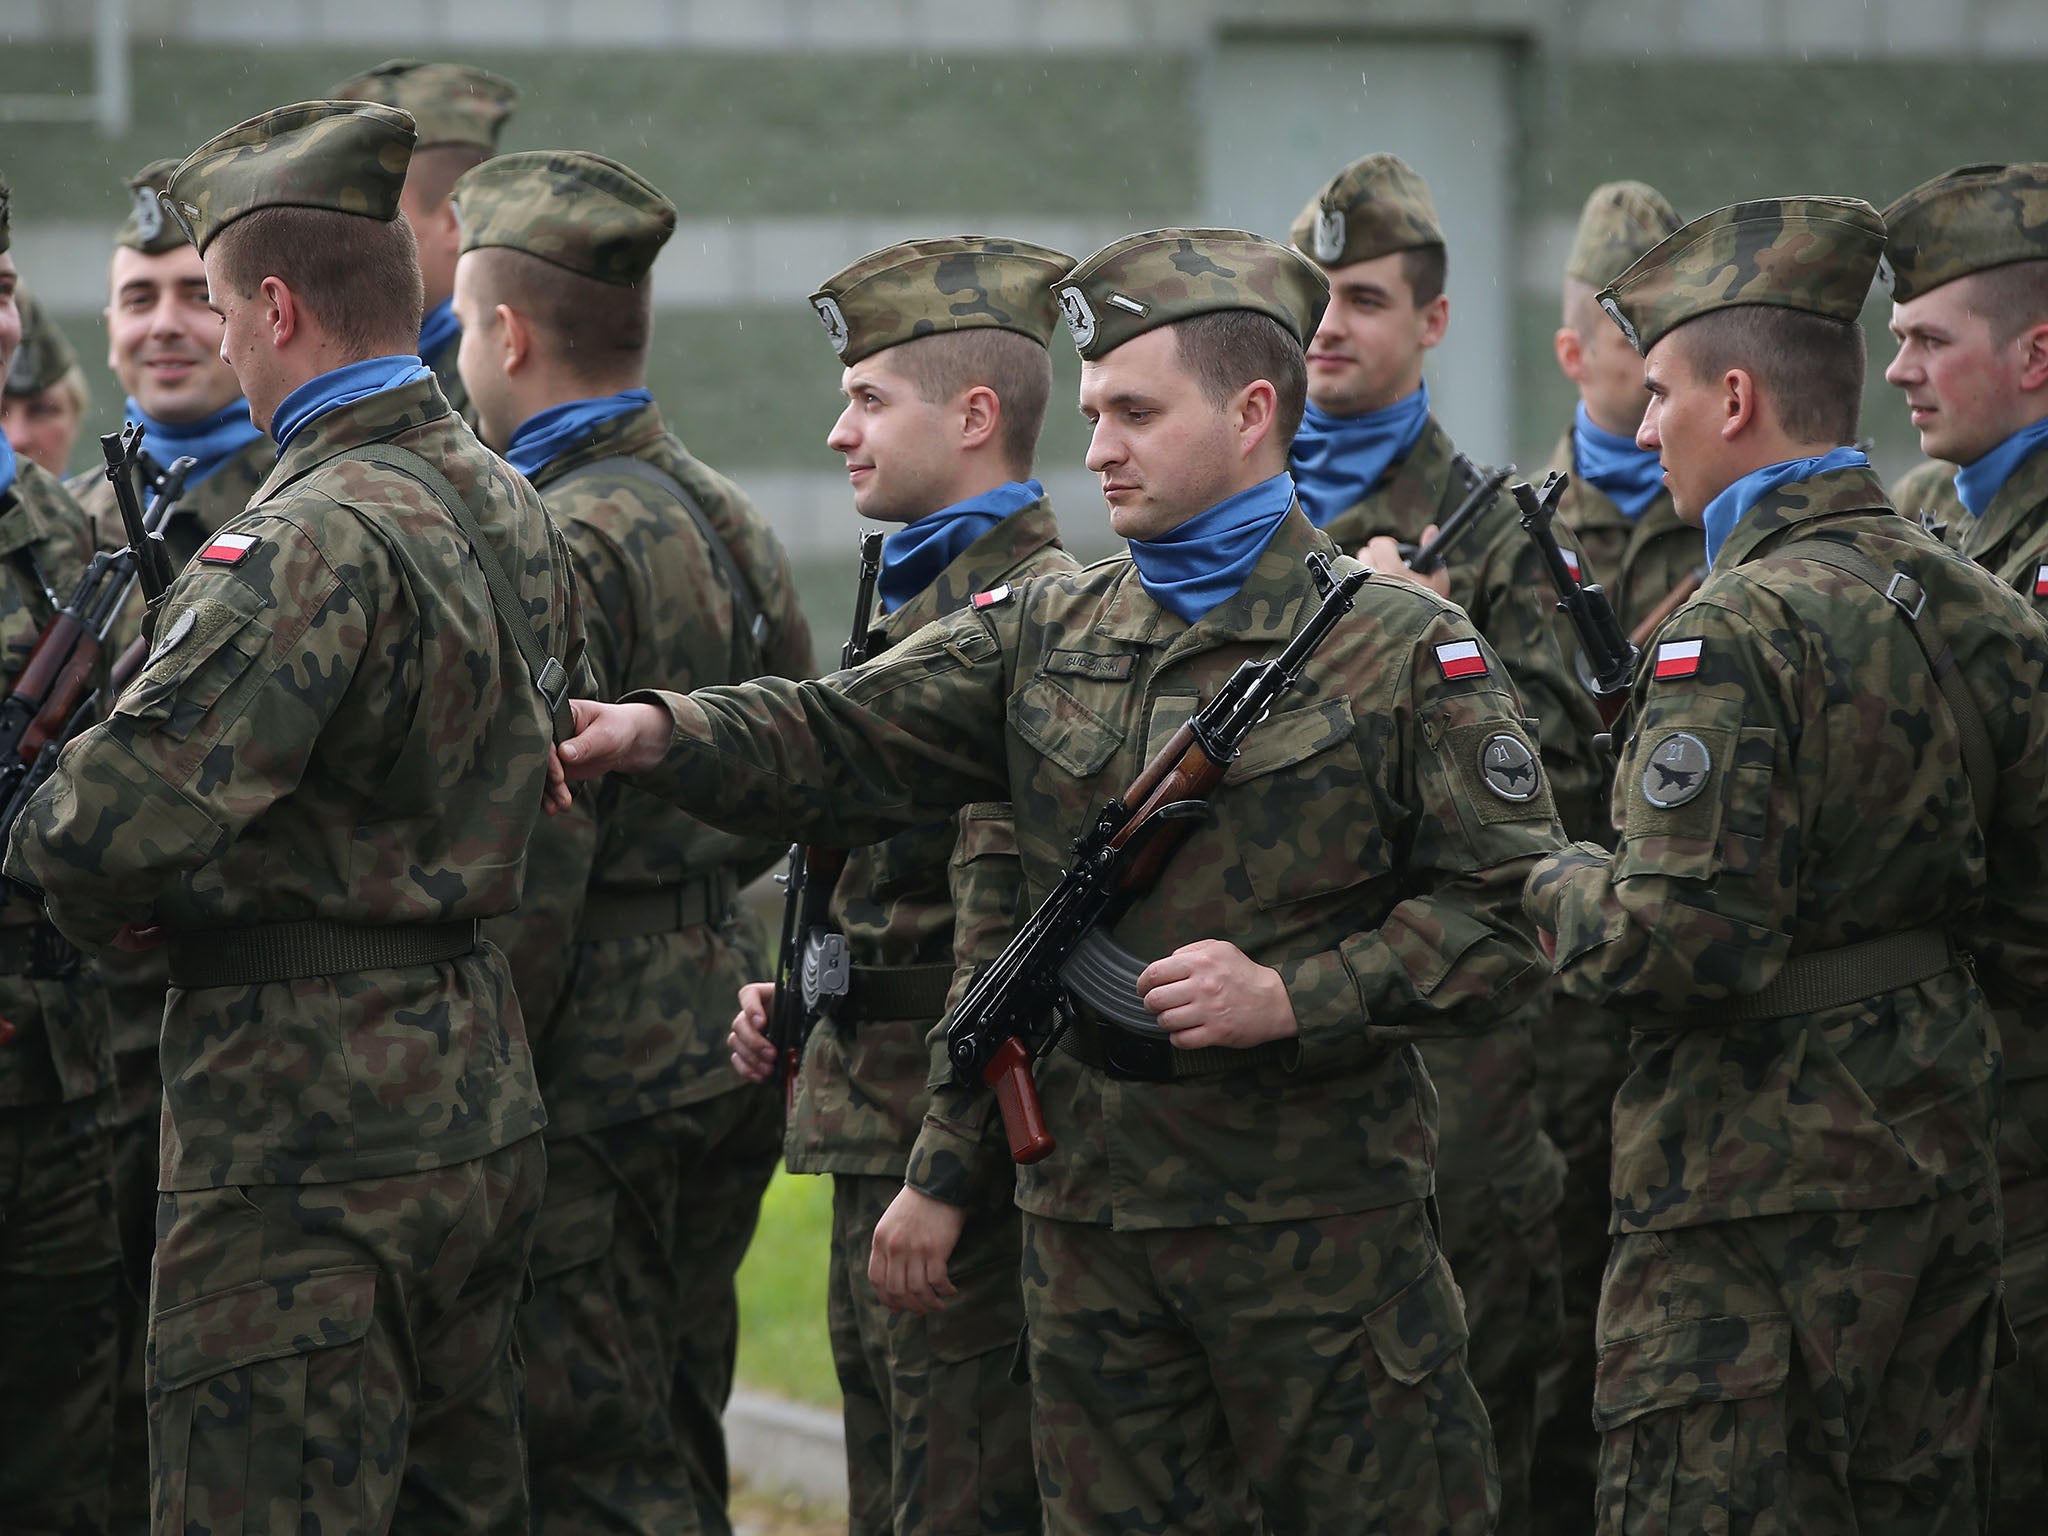 Polish soldiers assemble as part of Nato training exercise in 2014